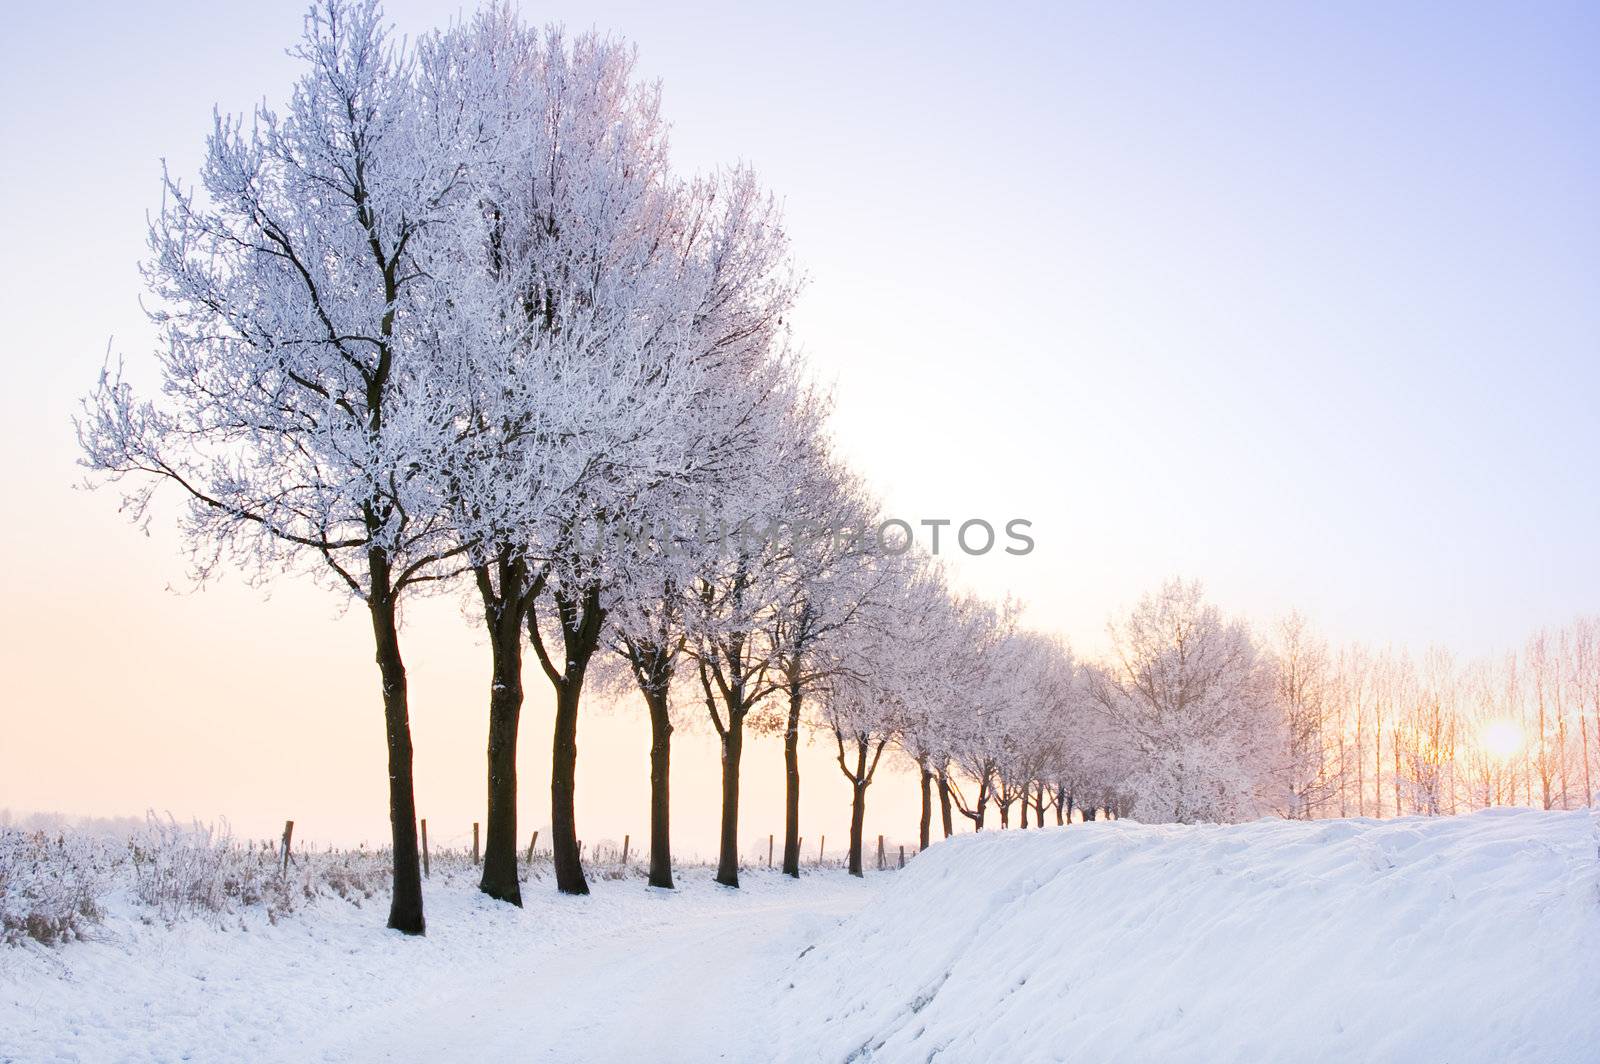 lovely scenic winter landscape with a row of trees at sunset